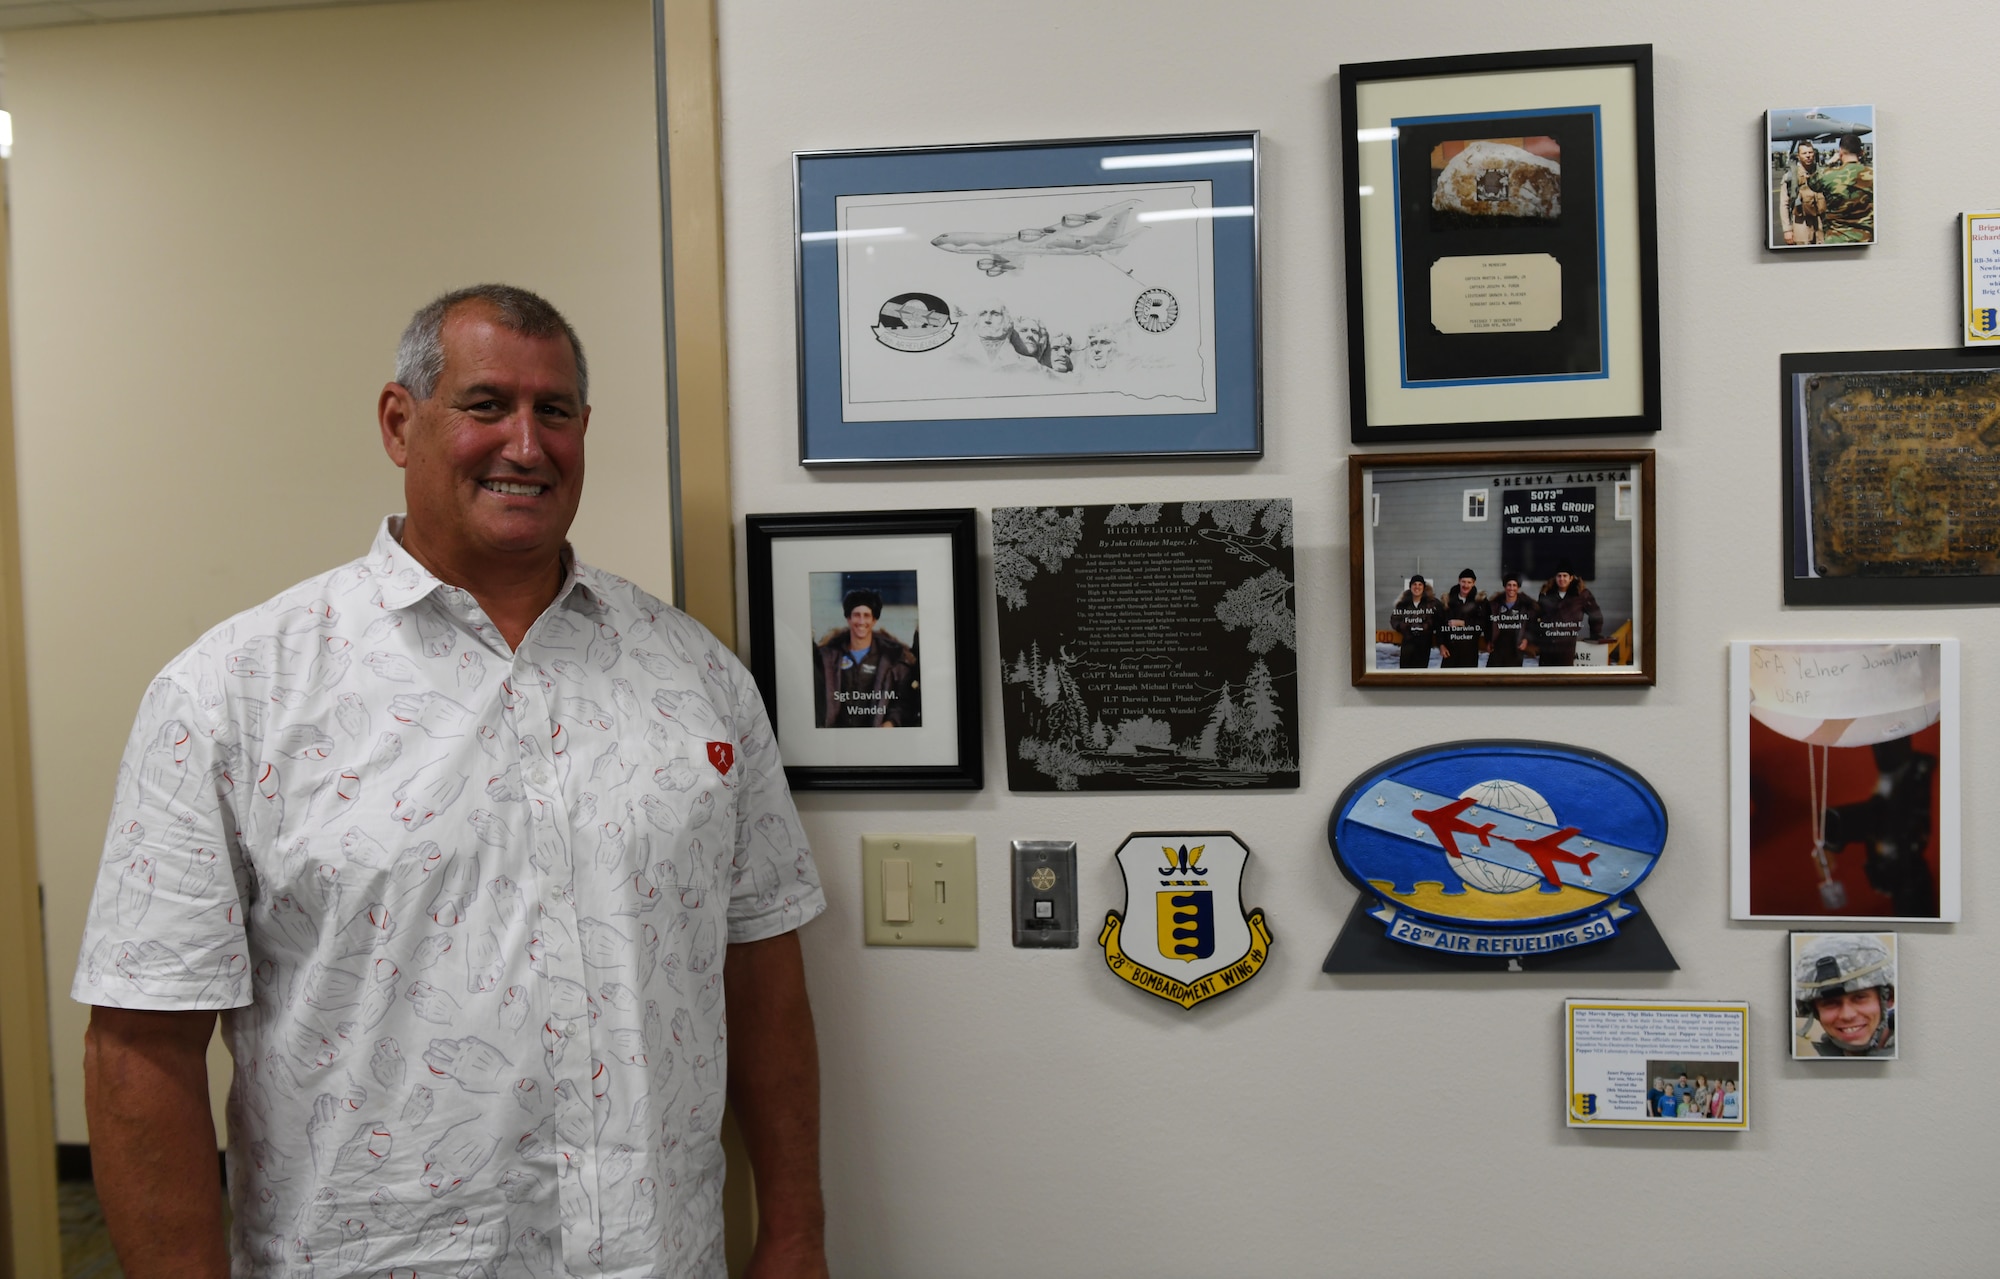 Jeff Wandel visits the memorial plaque that was dedicated to his brother, Sgt. David Wandel, a 28th Air Refueling Squadron boom operator, at the headquarters building on Ellsworth Air Force Base, S.D., July 30, 2019. After the 28th ARS was inactivated, the memorial was moved and Jeff spent several years trying to track it down. Eventually, the plaque was found in the South Dakota Air and Space Museum’s inventory. (U.S. Air Force photo by Airman 1st Class Christina Bennett)